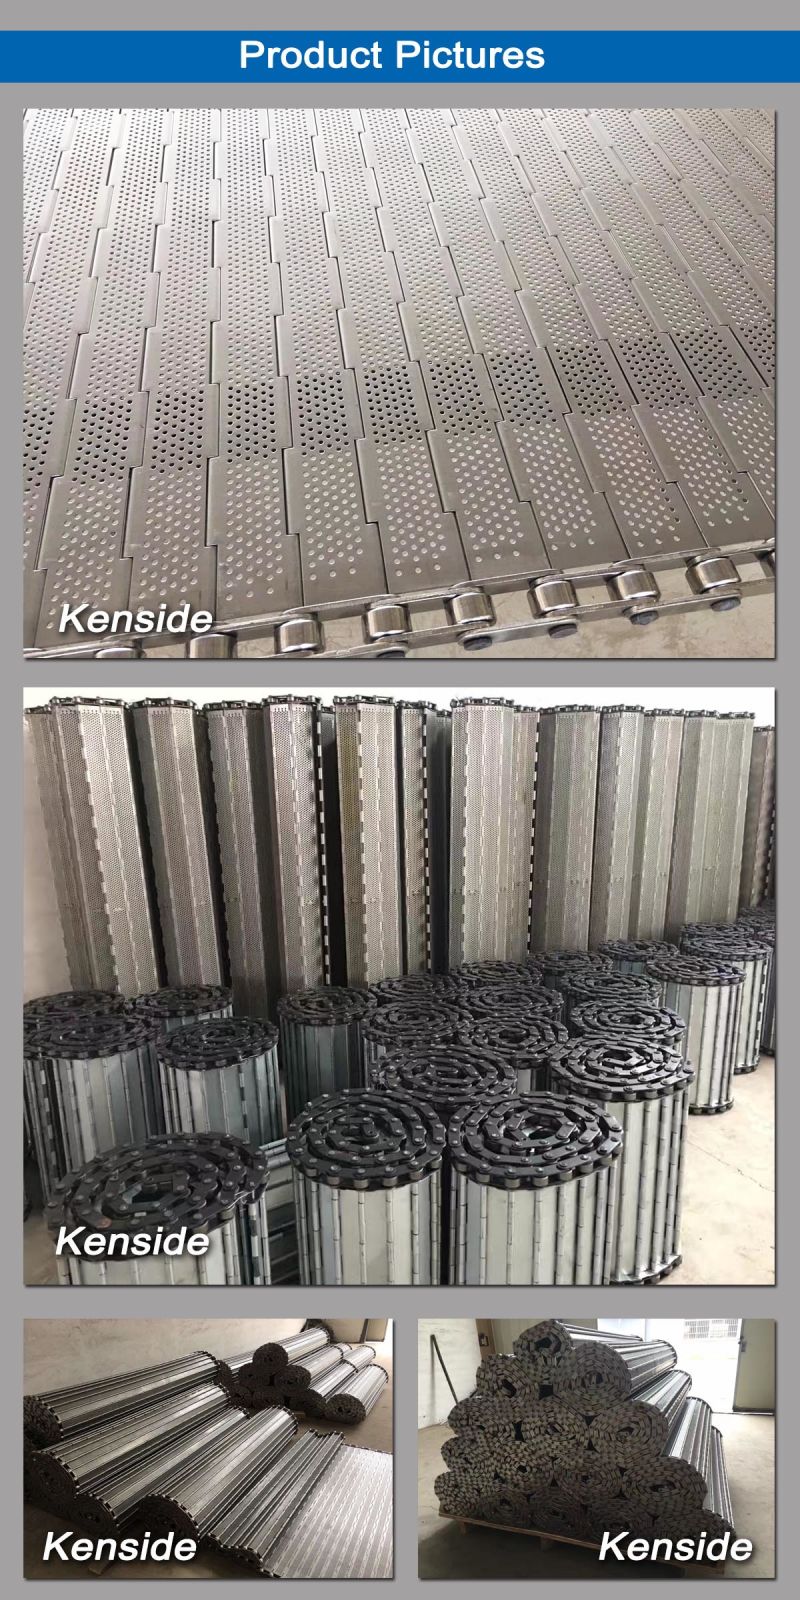 Professional Stainless Steel 304 Perforated Linked Plate Chain Conveyor Belt